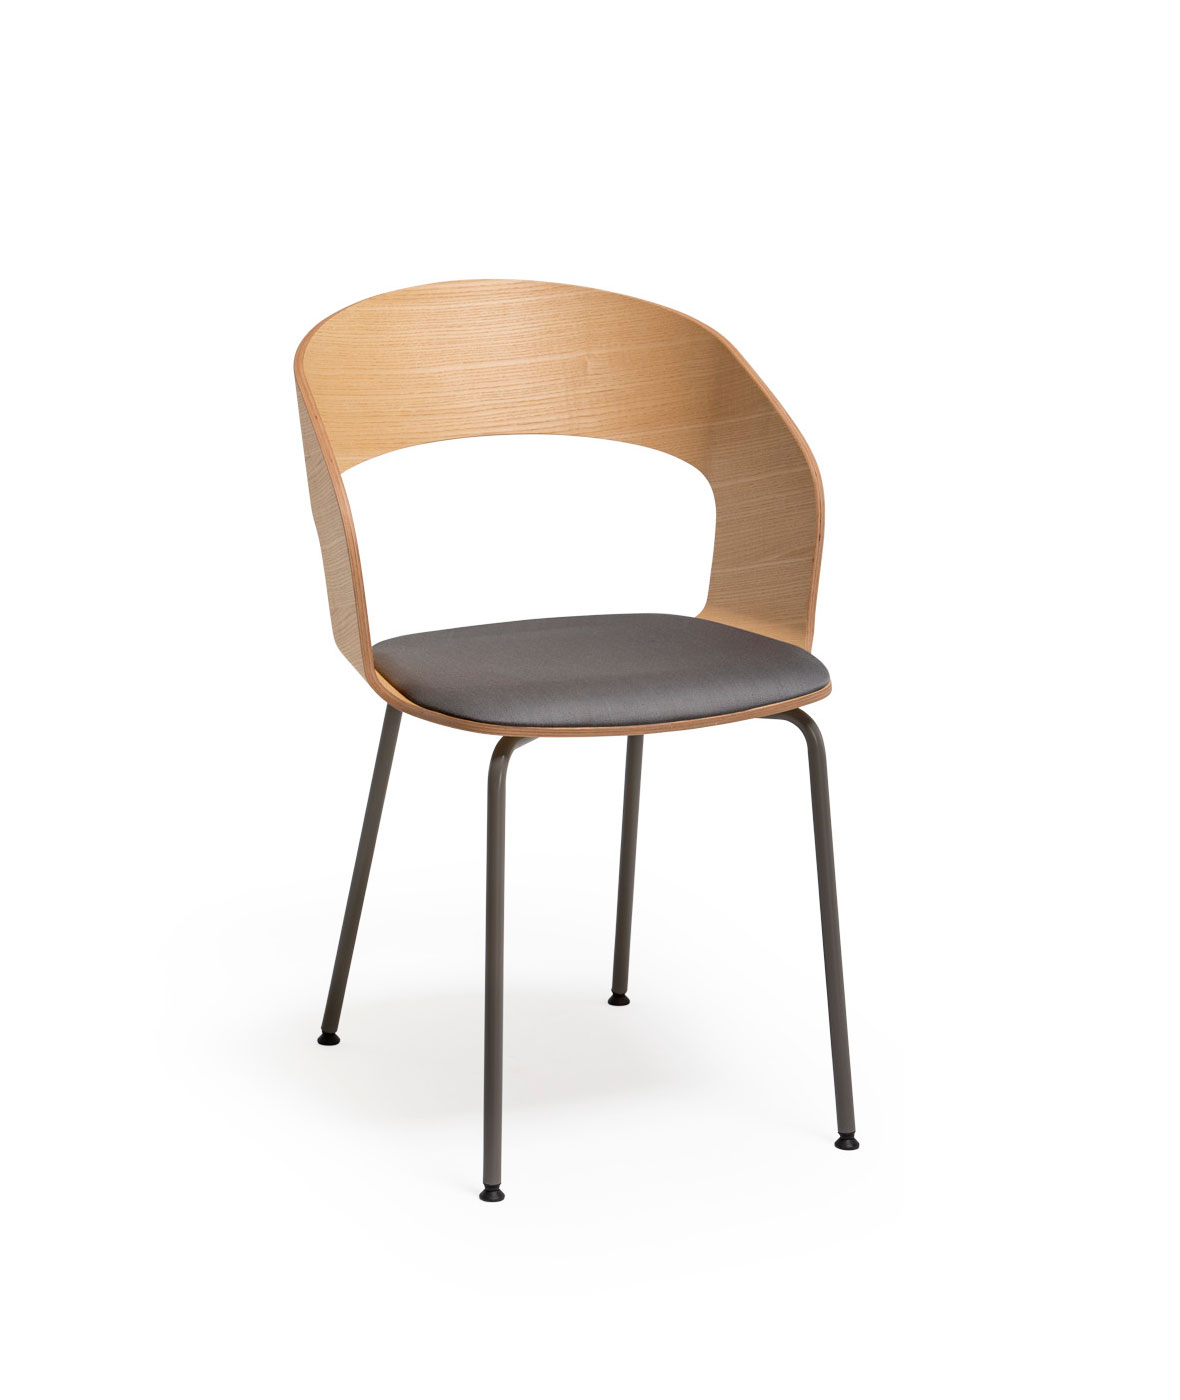 Goose chair Model B with metallic armrests and legs - Vergés